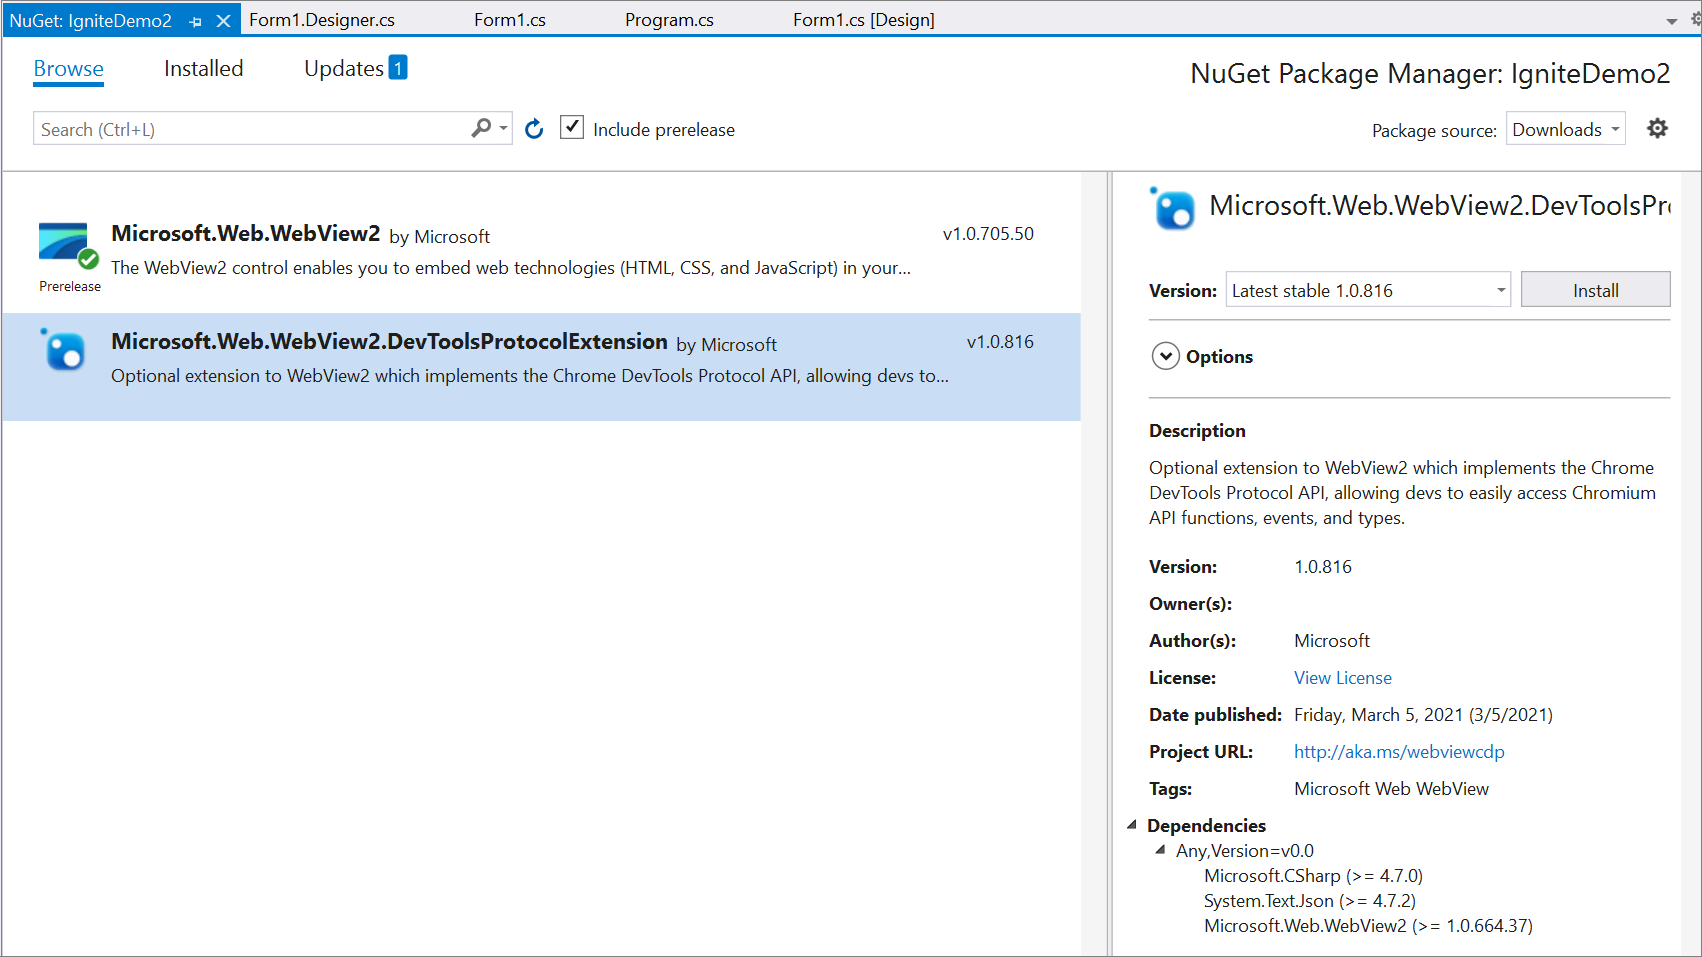 Making sure Microsoft.Web.WebView2.DevToolsProtocolExtension is displayed in the Visual Studio NuGet Package Manager